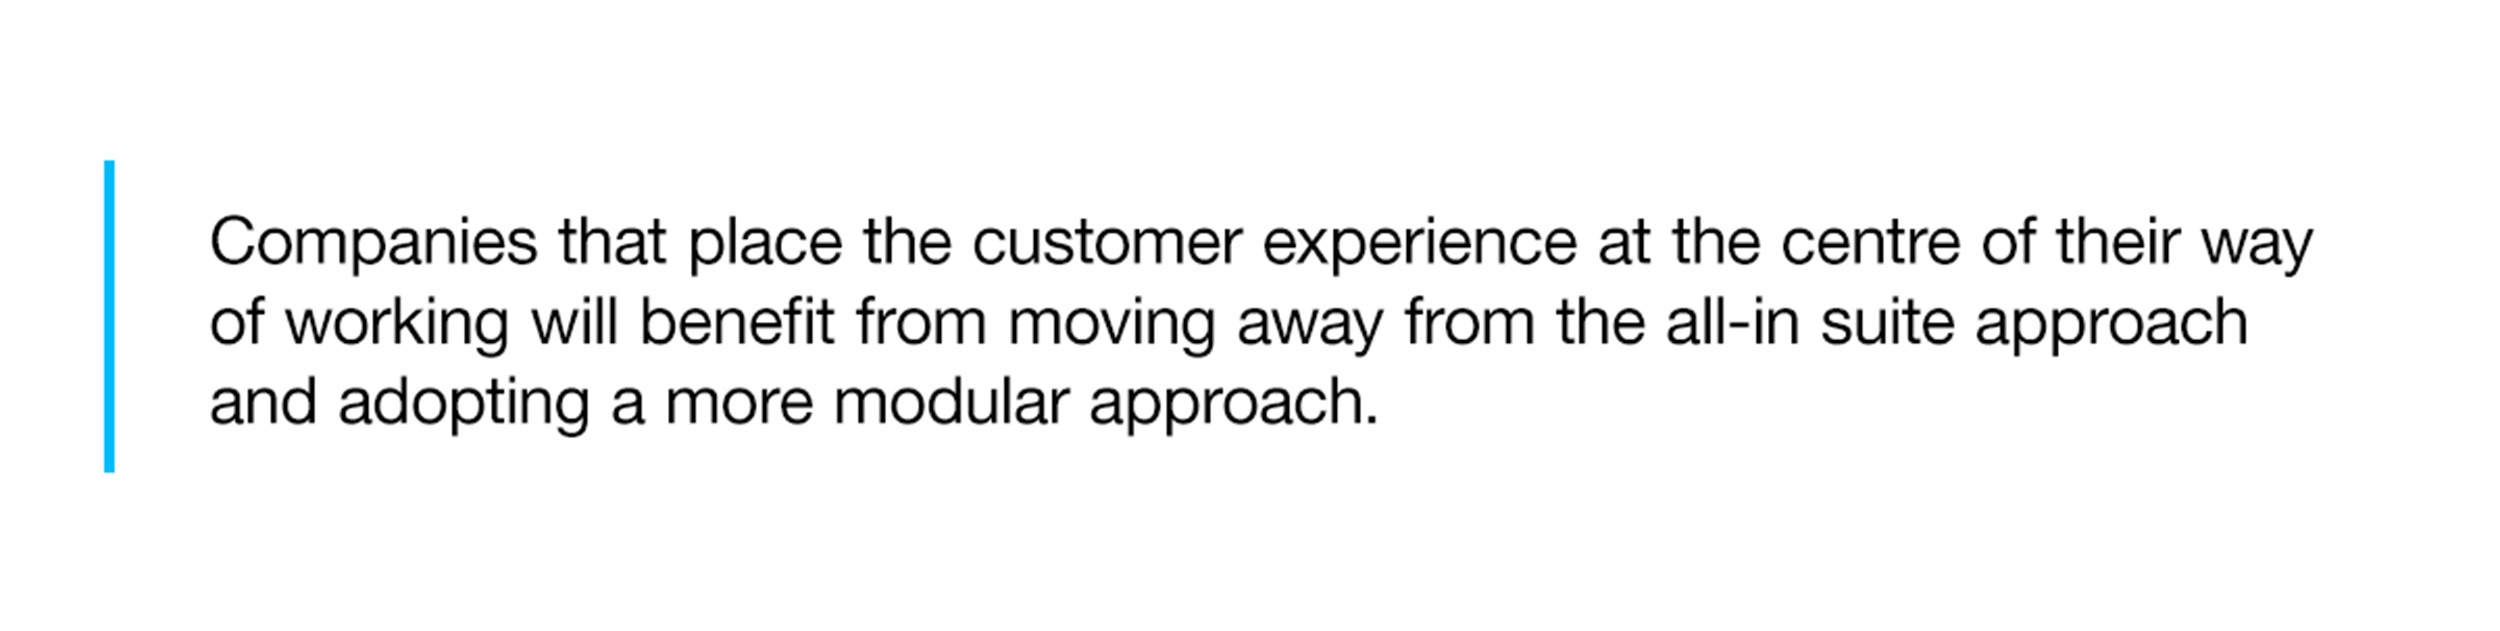 customer experience quote image